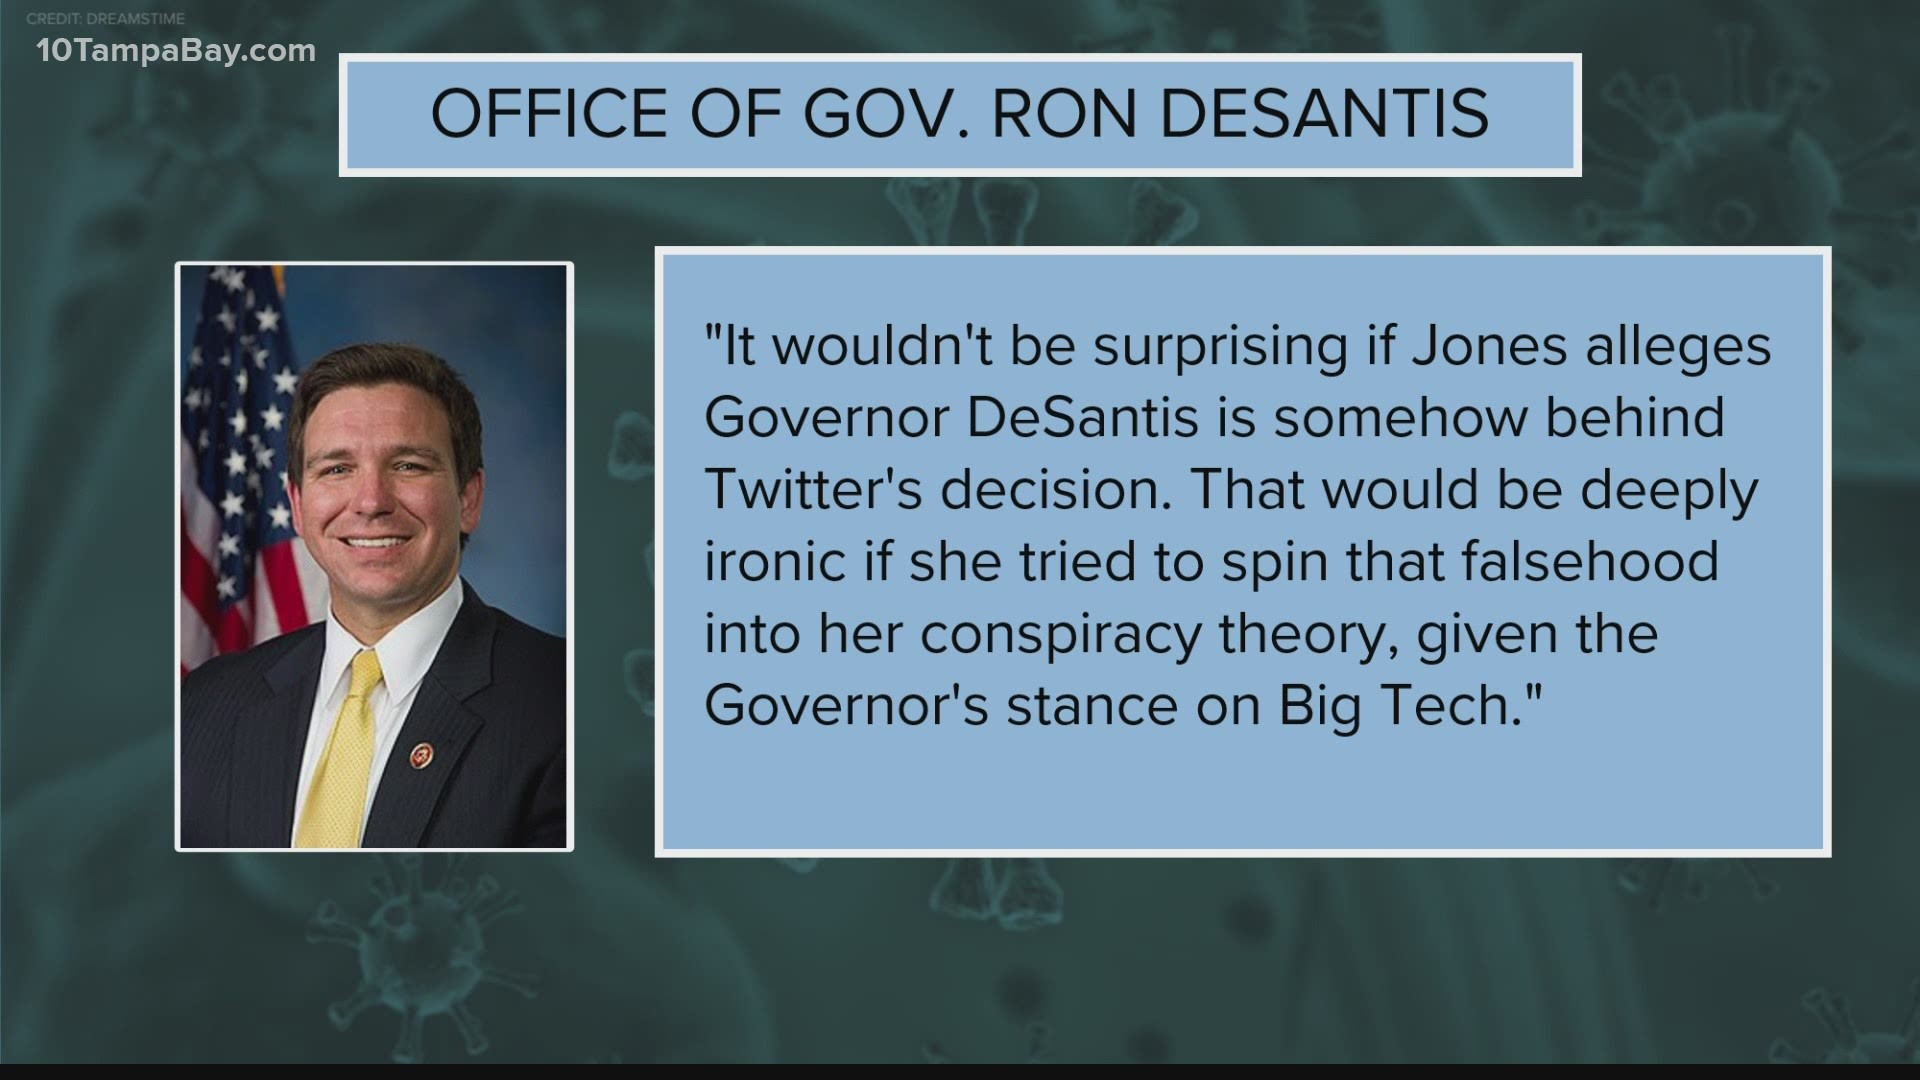 Gov. Ron DeSantis' office says they're of the understanding that Jones' account was suspended for “platform manipulation."